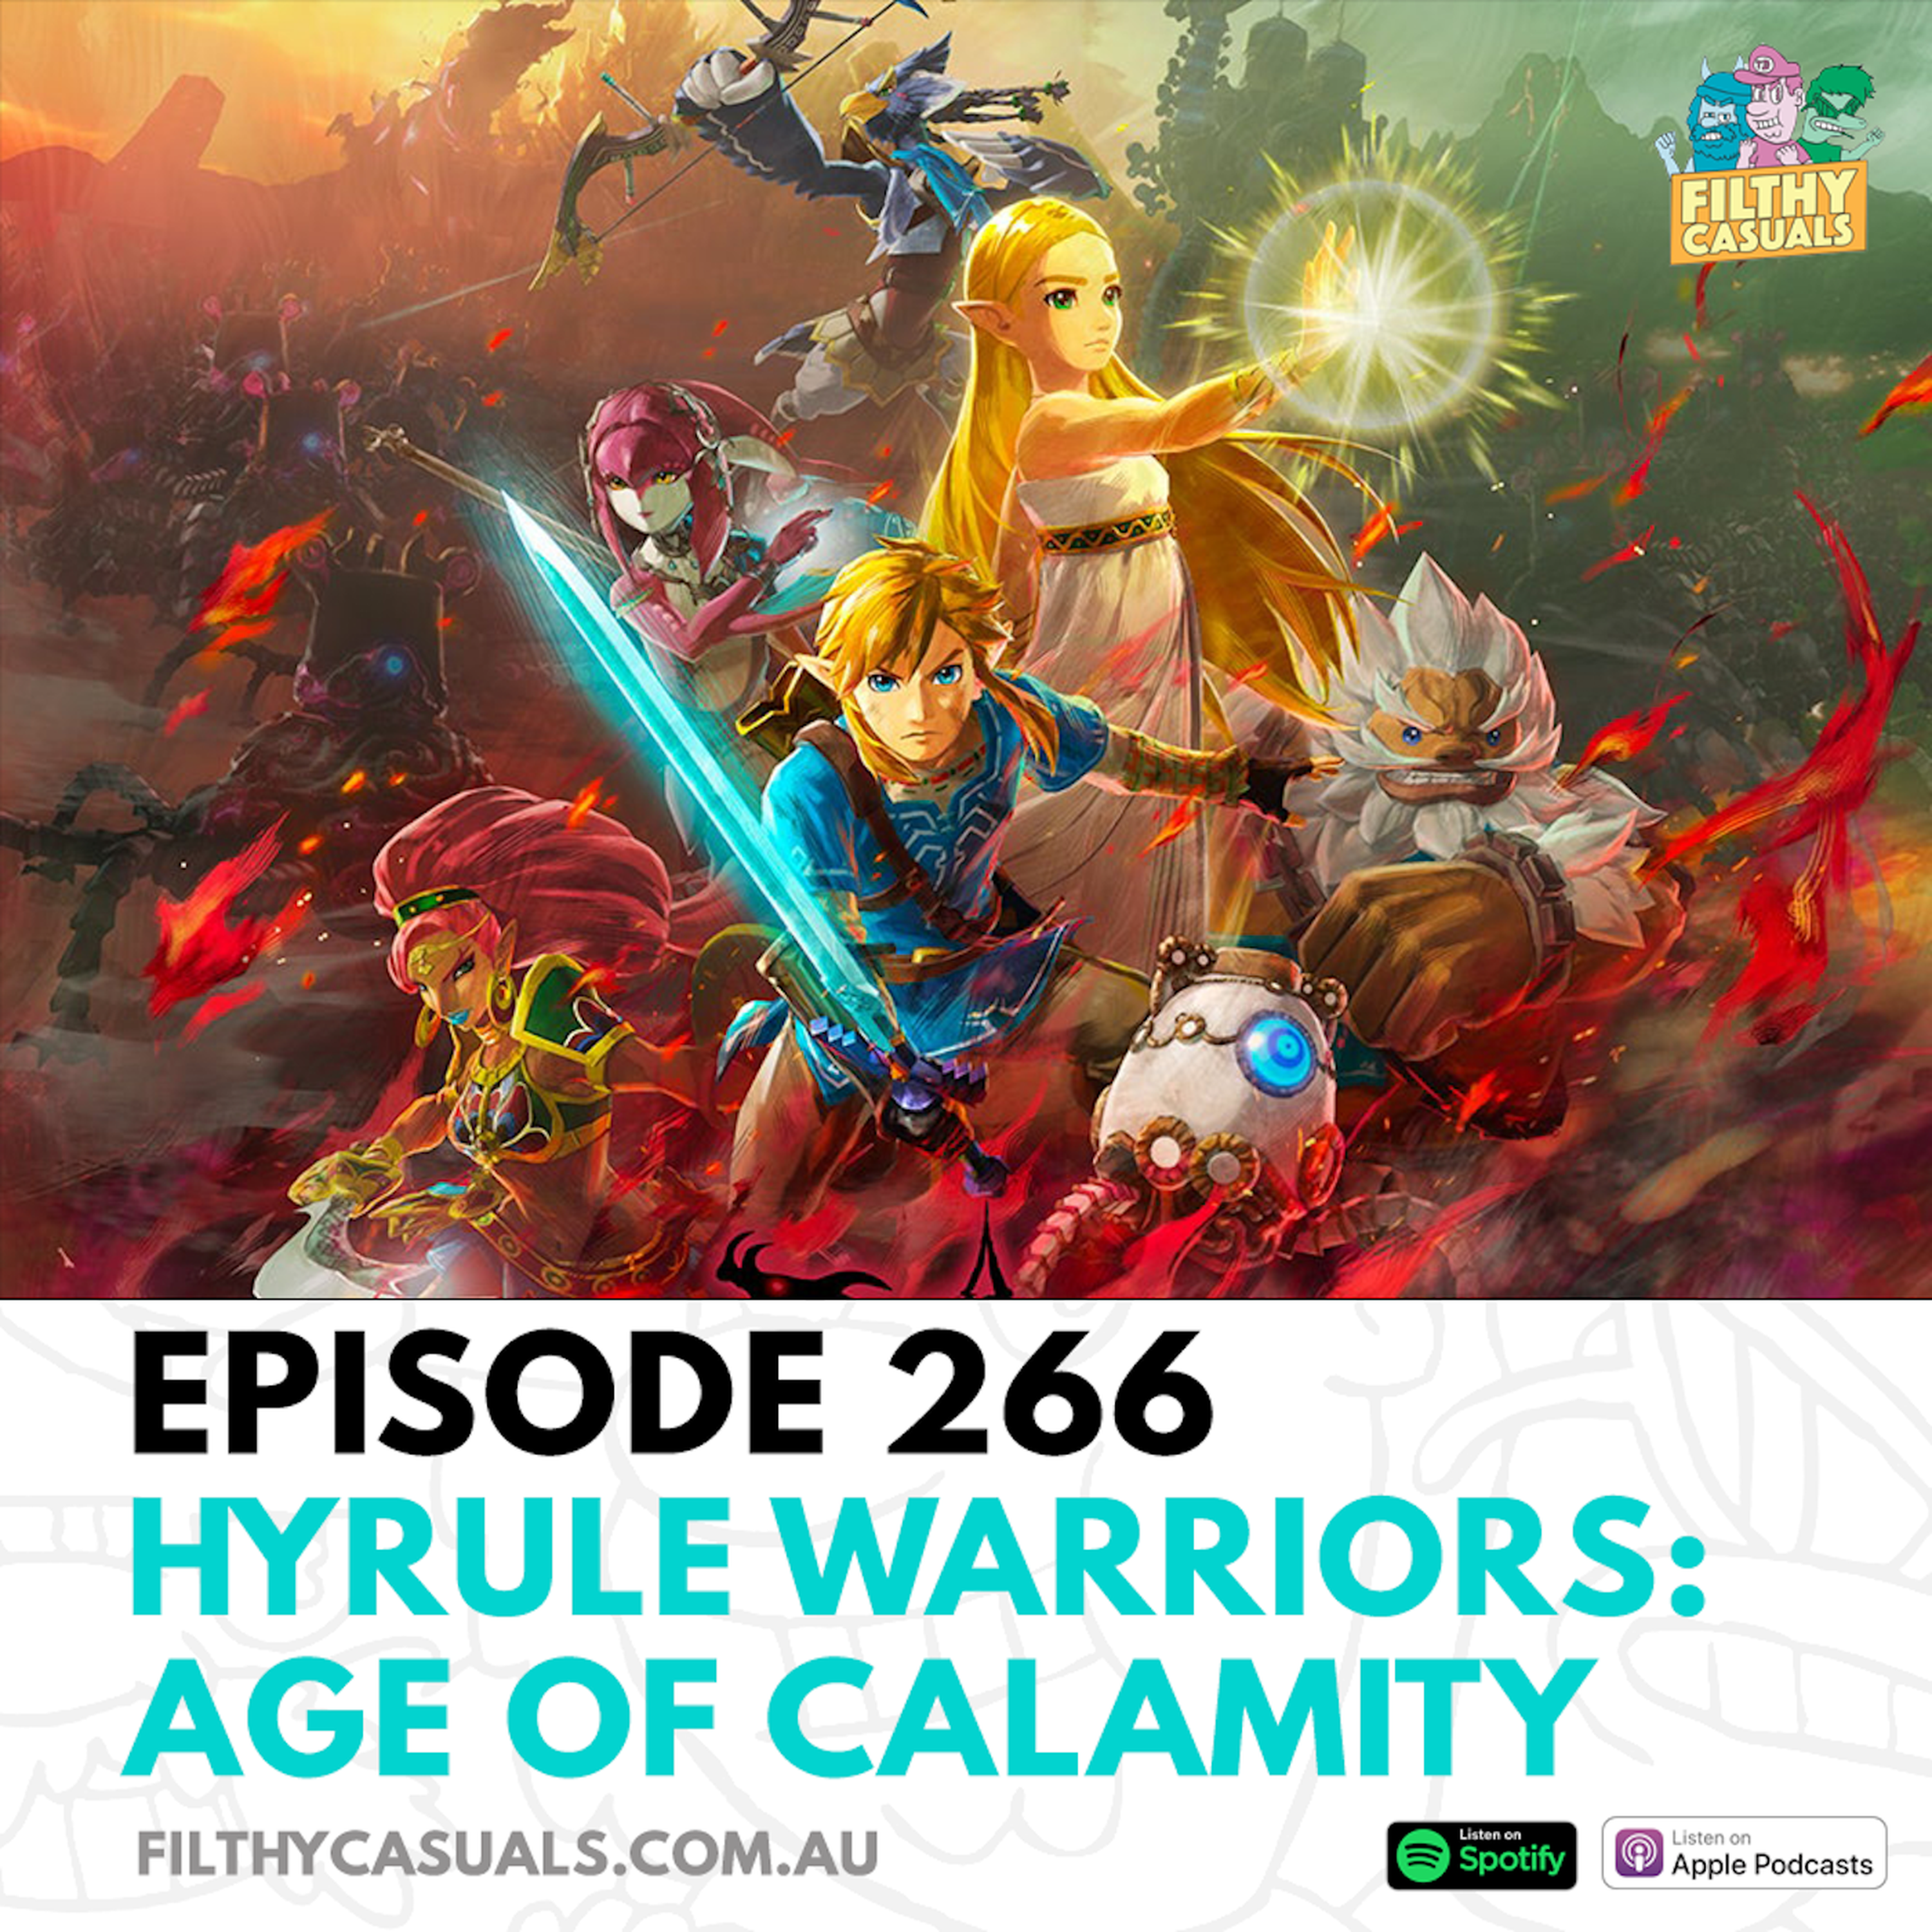 Episode 266: Hyrule Warriors: Age of Calamity